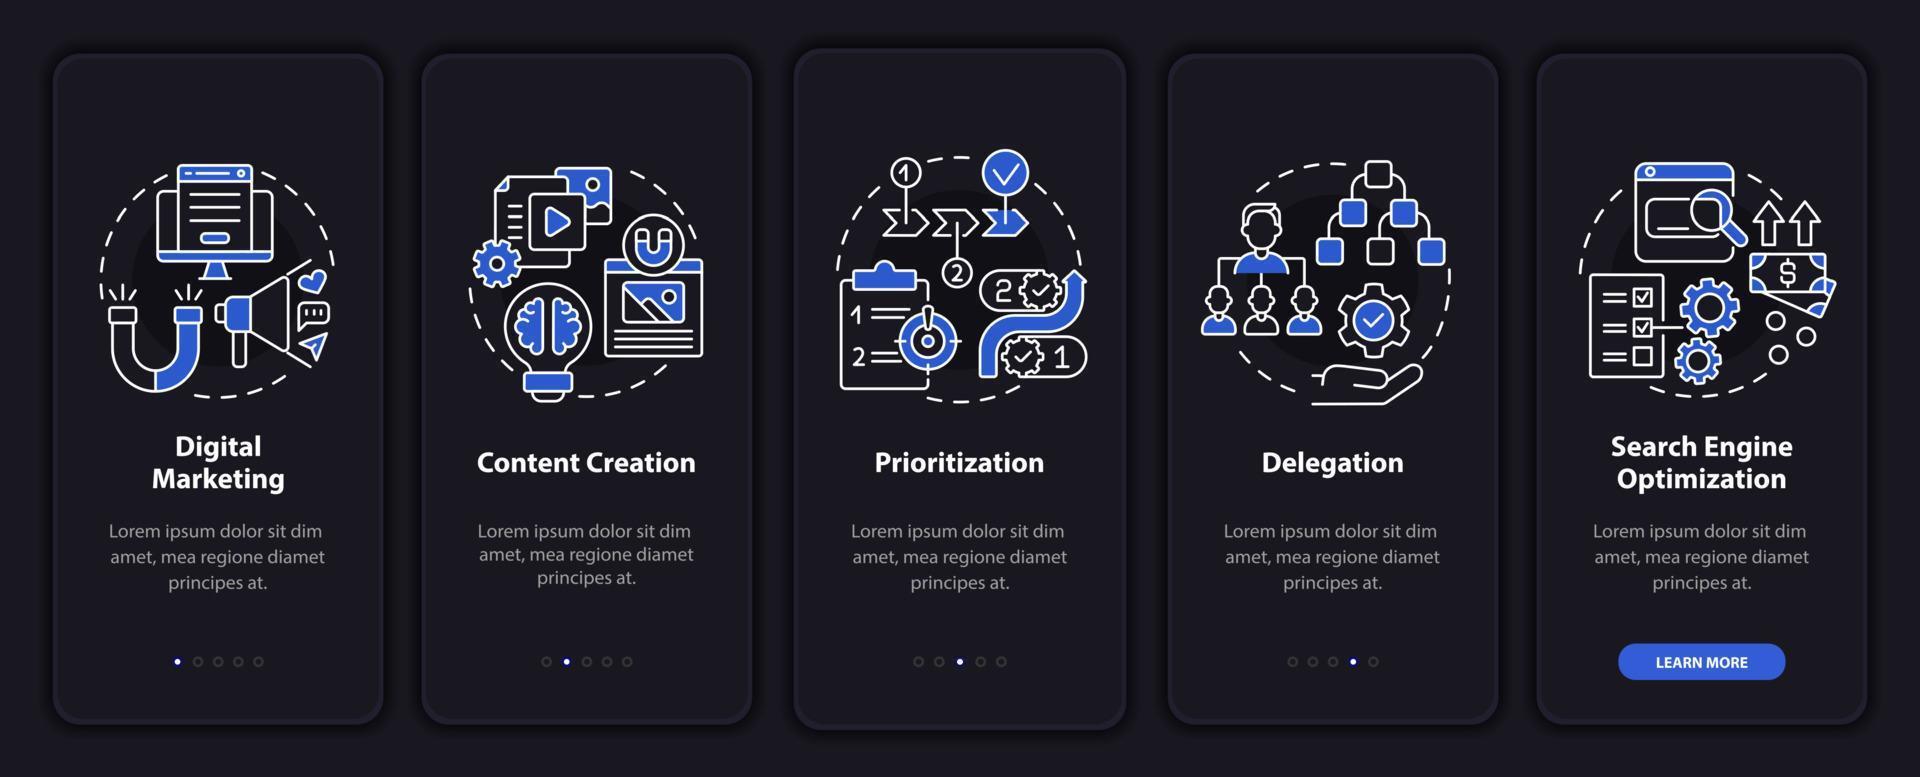 Online business skills onboarding mobile app page screen. Content creation walkthrough 5 steps graphic instructions with concepts. UI, UX, GUI vector template with linear night mode illustrations